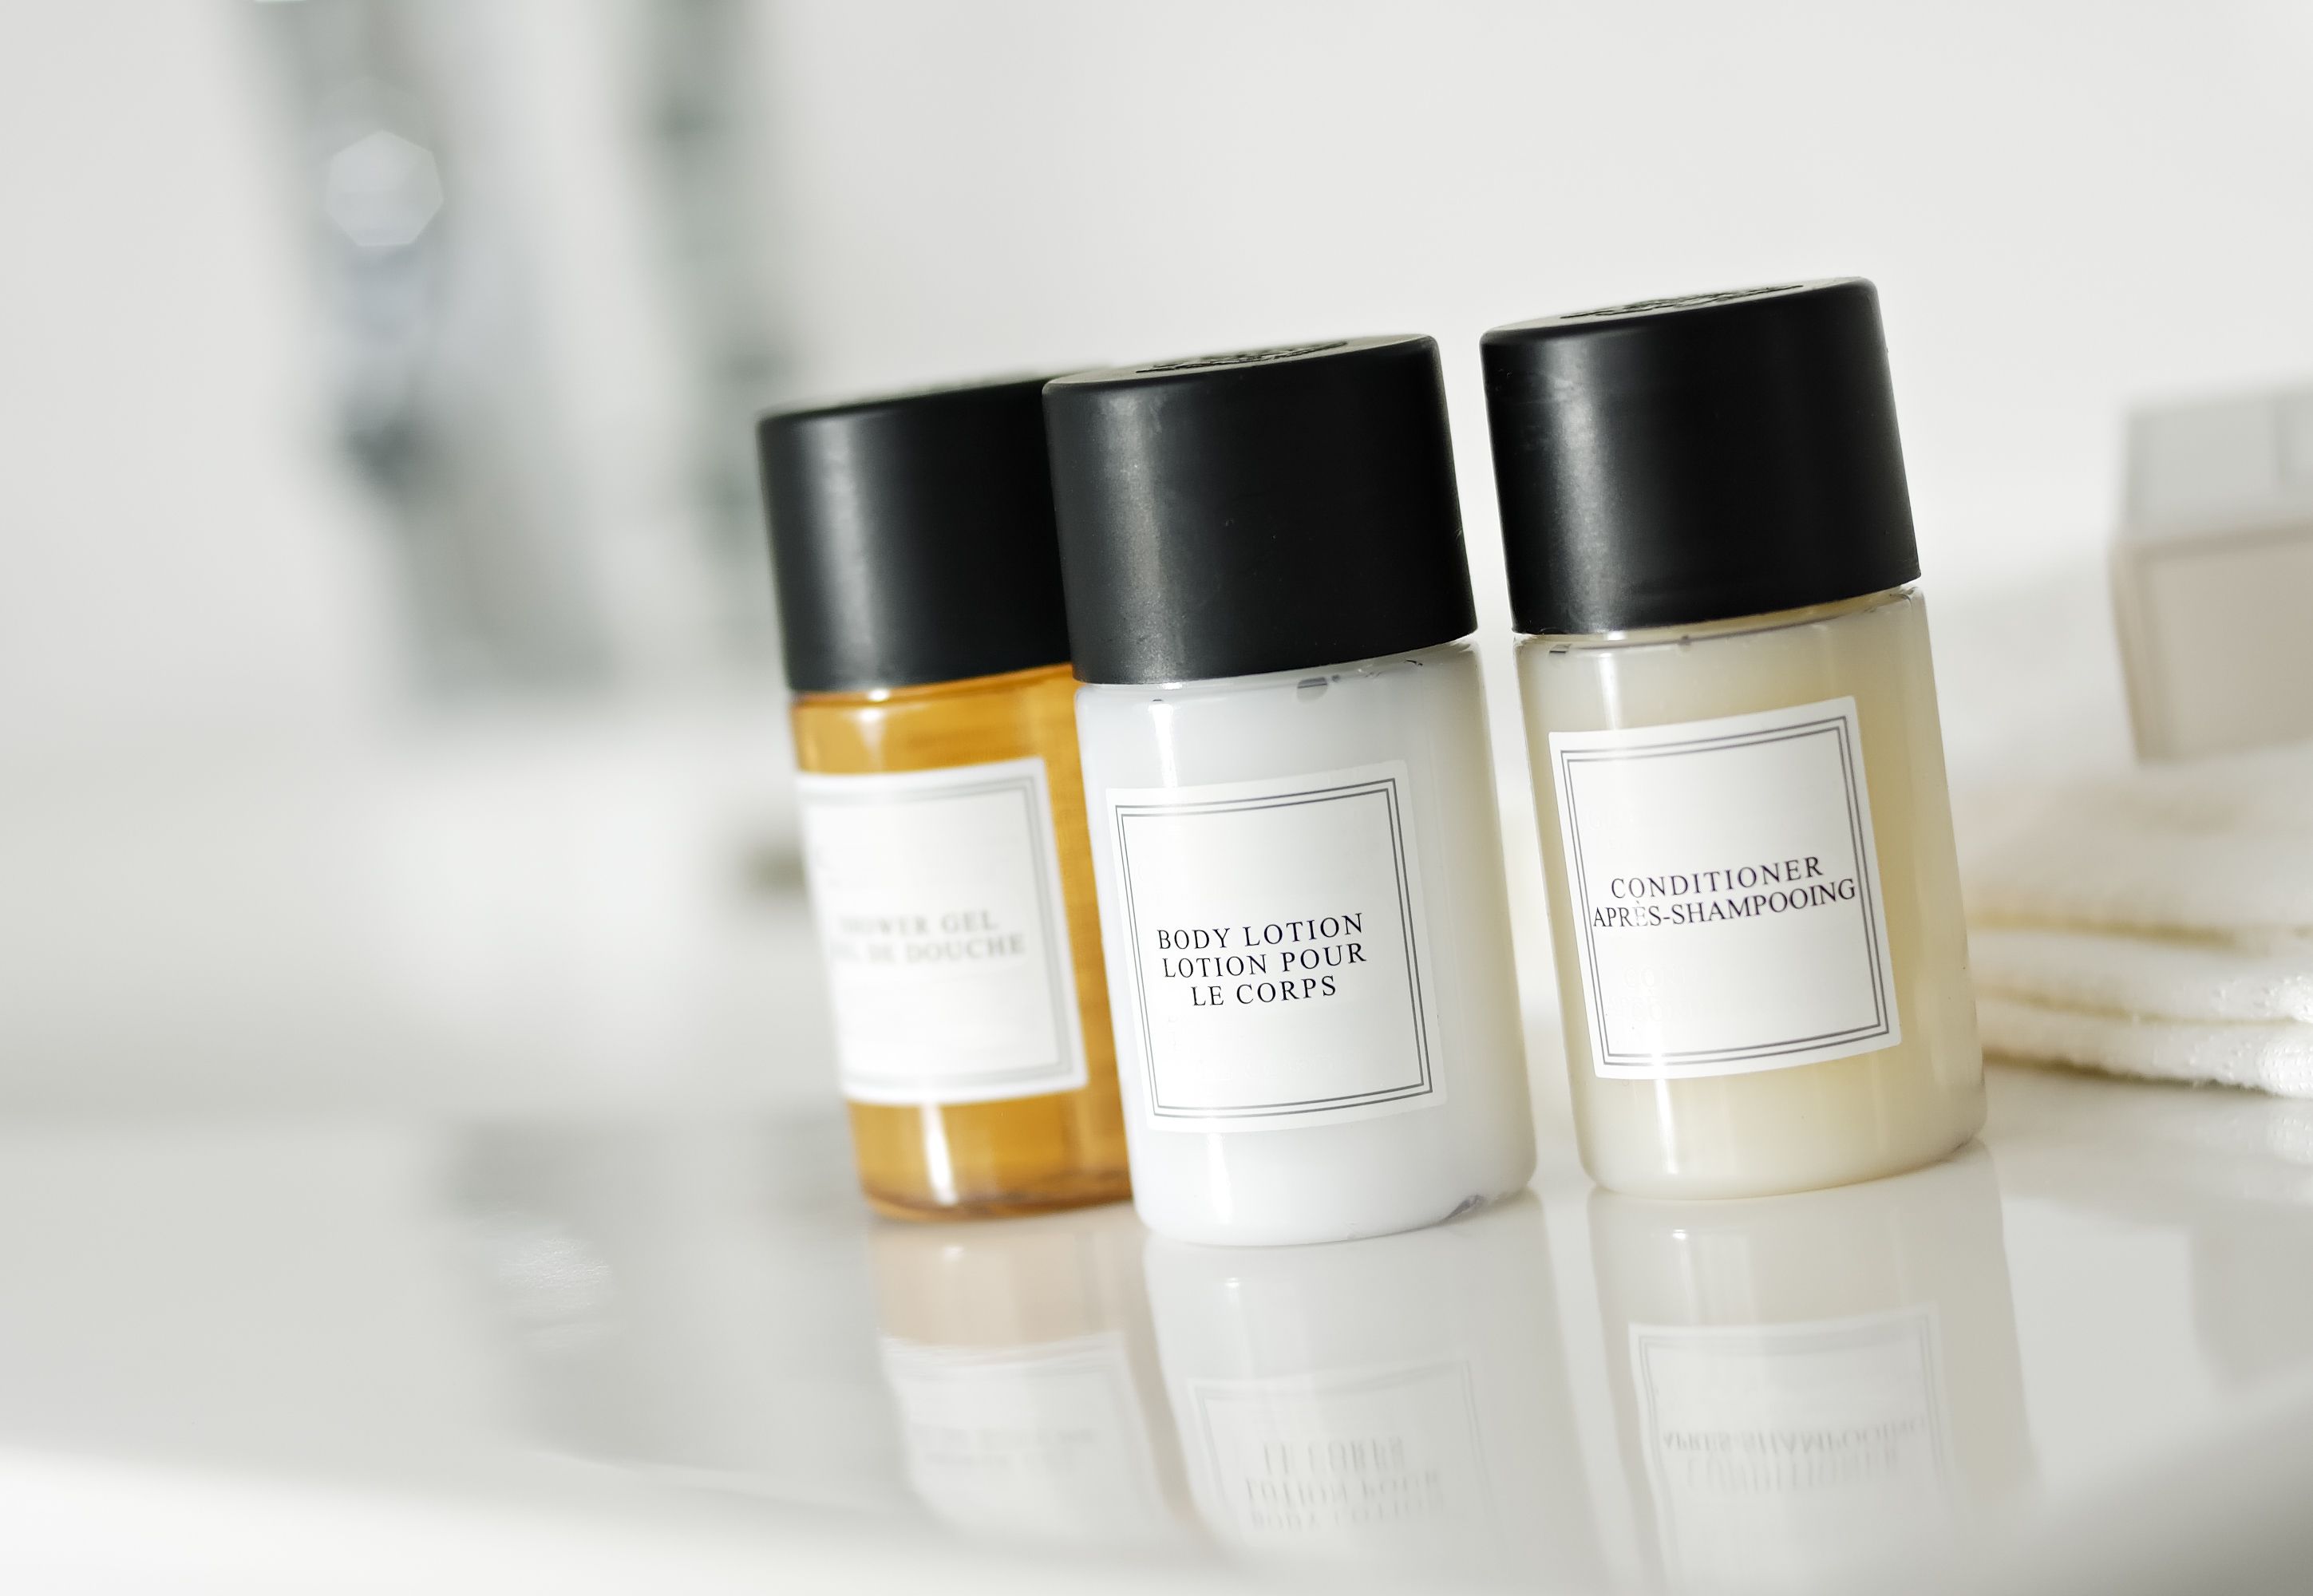 <p>You’ve probably already seen mini toiletries being replaced with reusable wall-fixed dispensers, but now the European Union is <a href="https://www.timeout.com/news/end-of-an-era-hotels-across-europe-are-banning-tiny-toiletries-121922">set to ban them </a>throughout the EU. It’s part of a wider plan to “make sure that a certain proportion of hotel products are reusable or refillable,” so grab those freebies while you still can!</p> <p><b>Related:</b> <a href="https://blog.cheapism.com/secret-hotel-perks-17133/">Incredible Free Amenities at Hotels Across America</a></p>